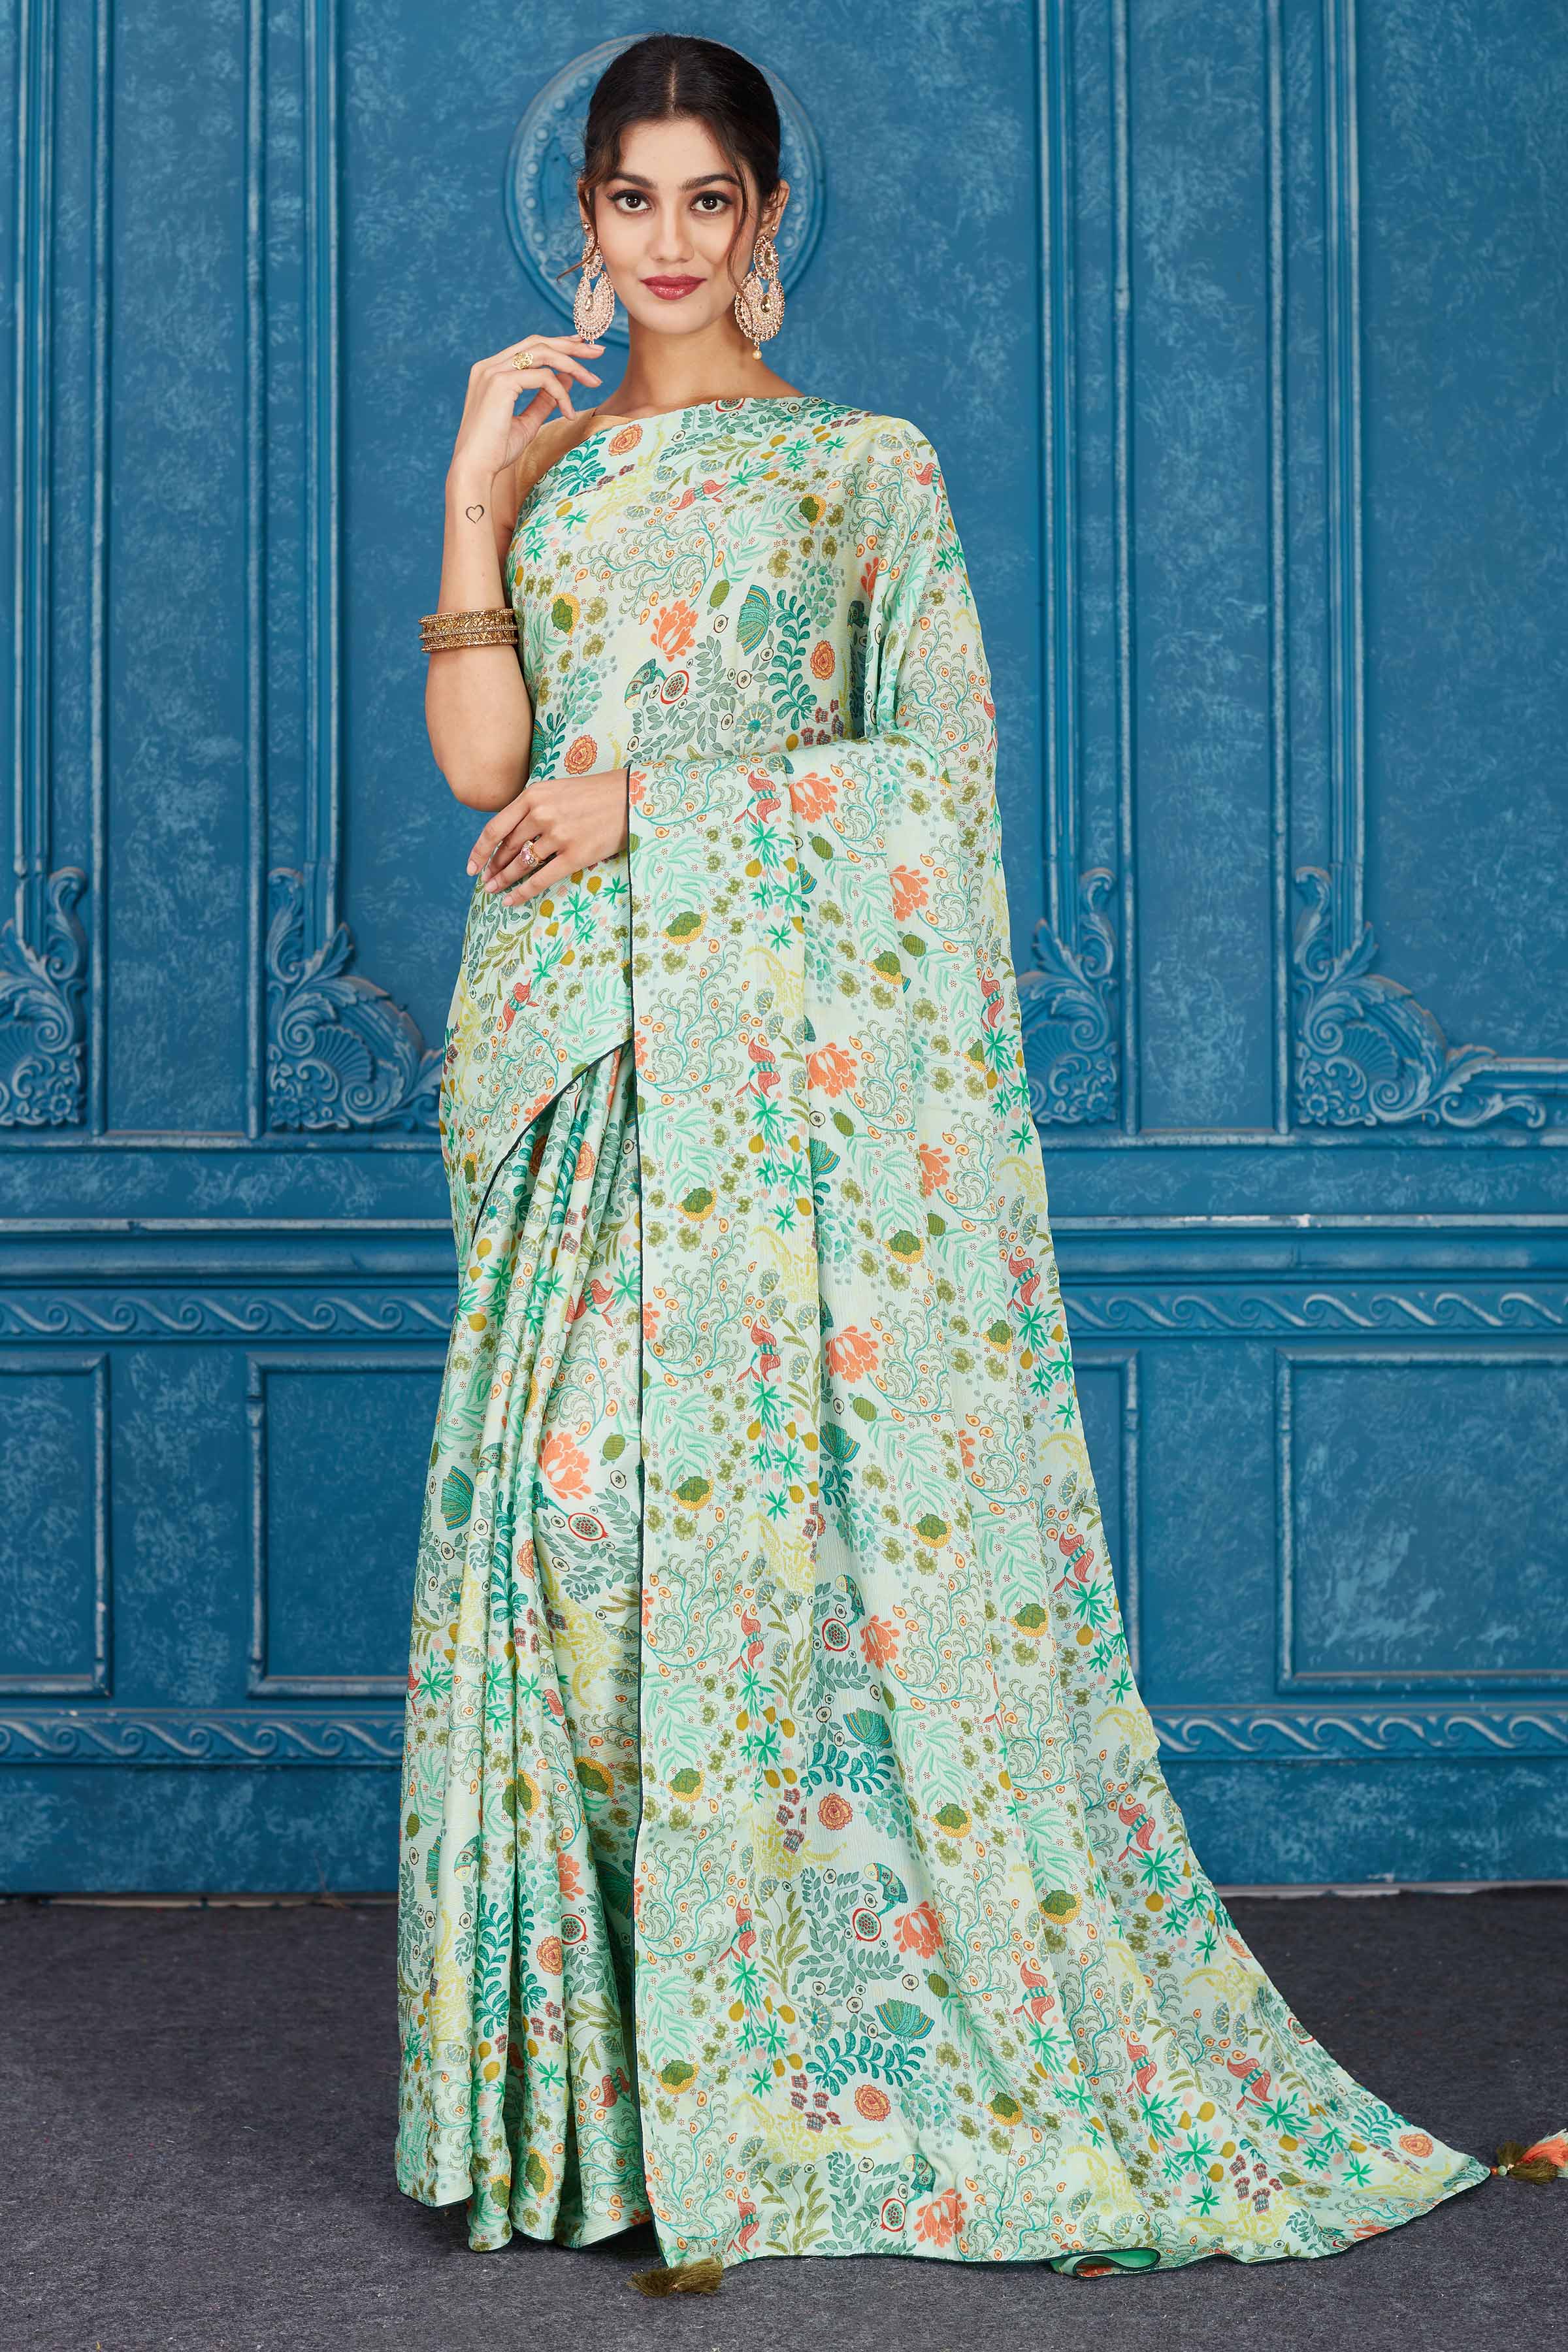 Shop mint green printed crepe chiffon sari online in USA. Look your best on festive occasions in latest designer sarees, pure silk saris, Kanchipuram silk sarees, handwoven sarees, tussar silk sarees, embroidered sarees from Pure Elegance Indian clothing store in USA.-full view